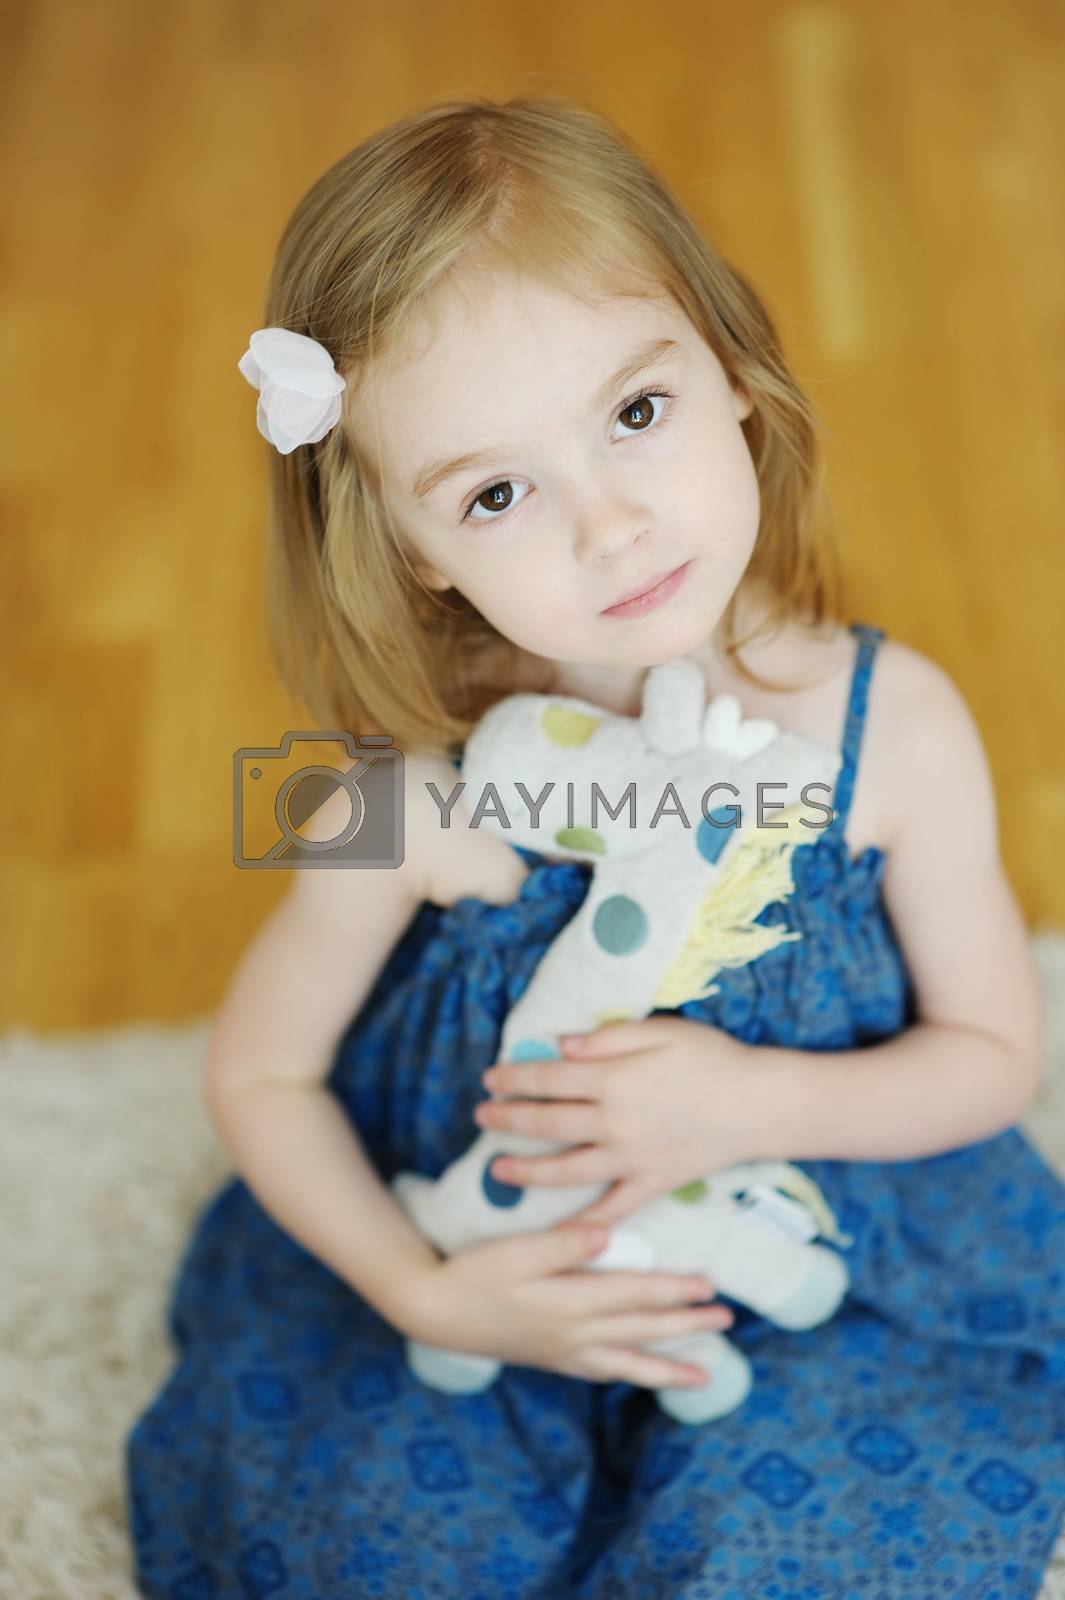 Royalty free image of Cheerful child with a toy by maximkabb